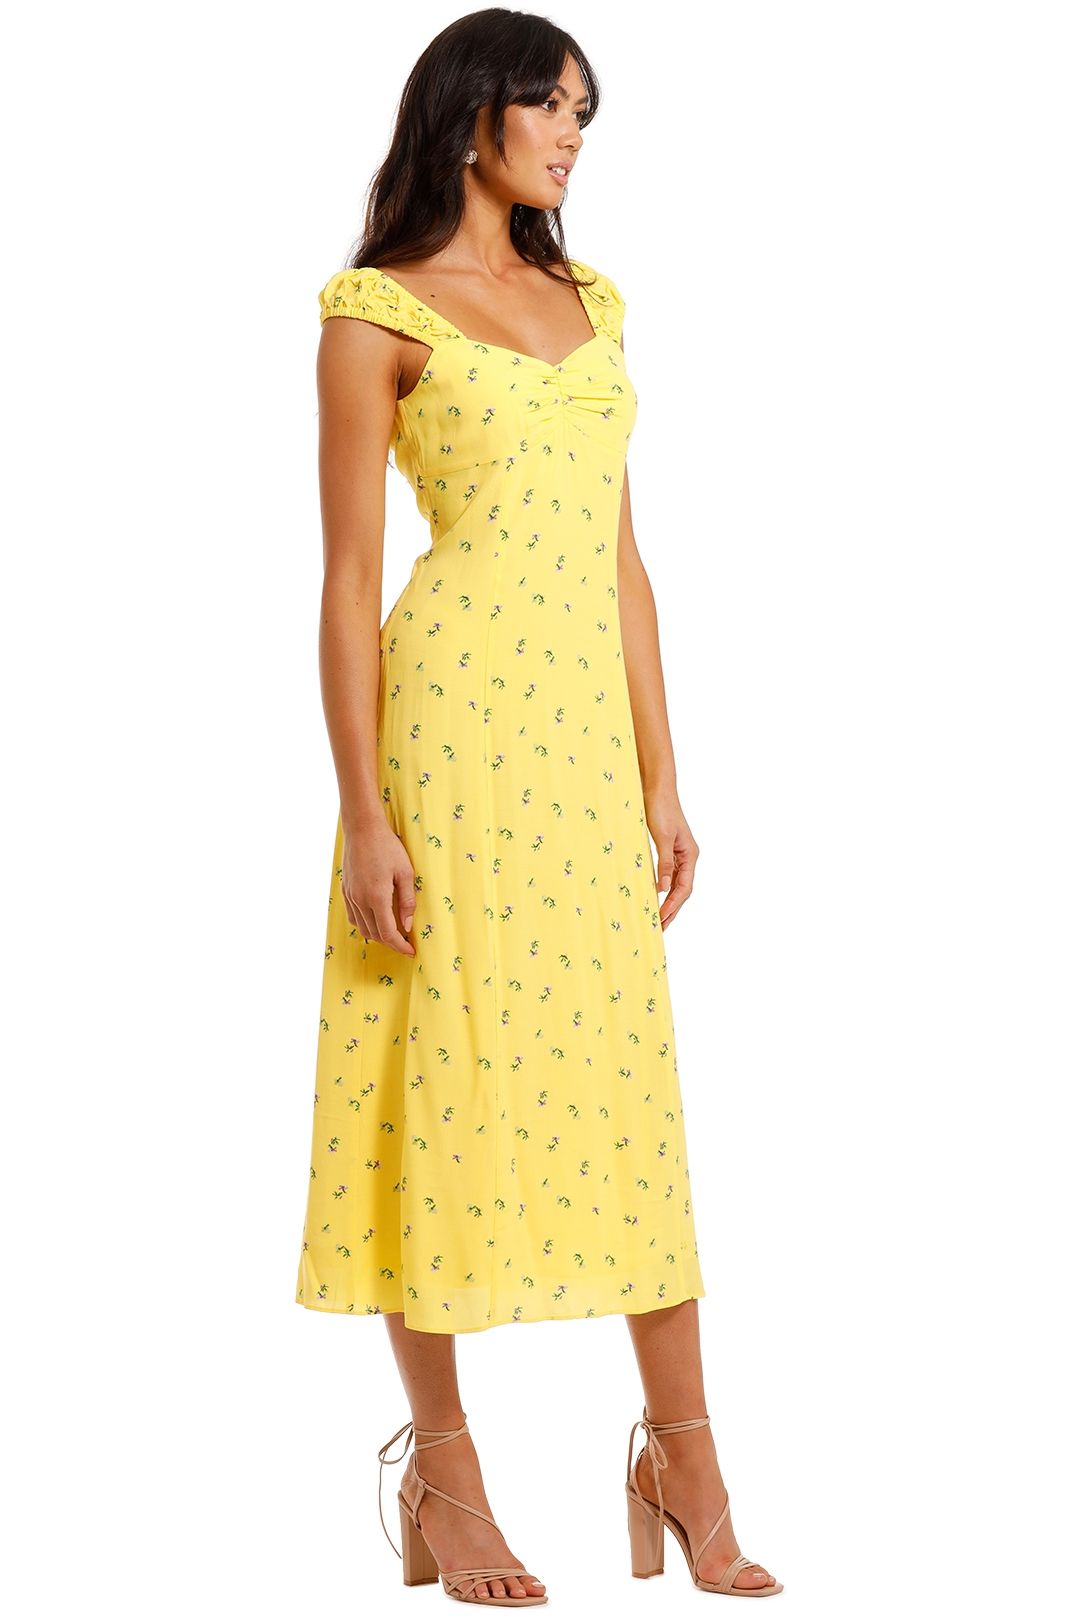 Whistles Forget Me Not Dress Yellow Floral